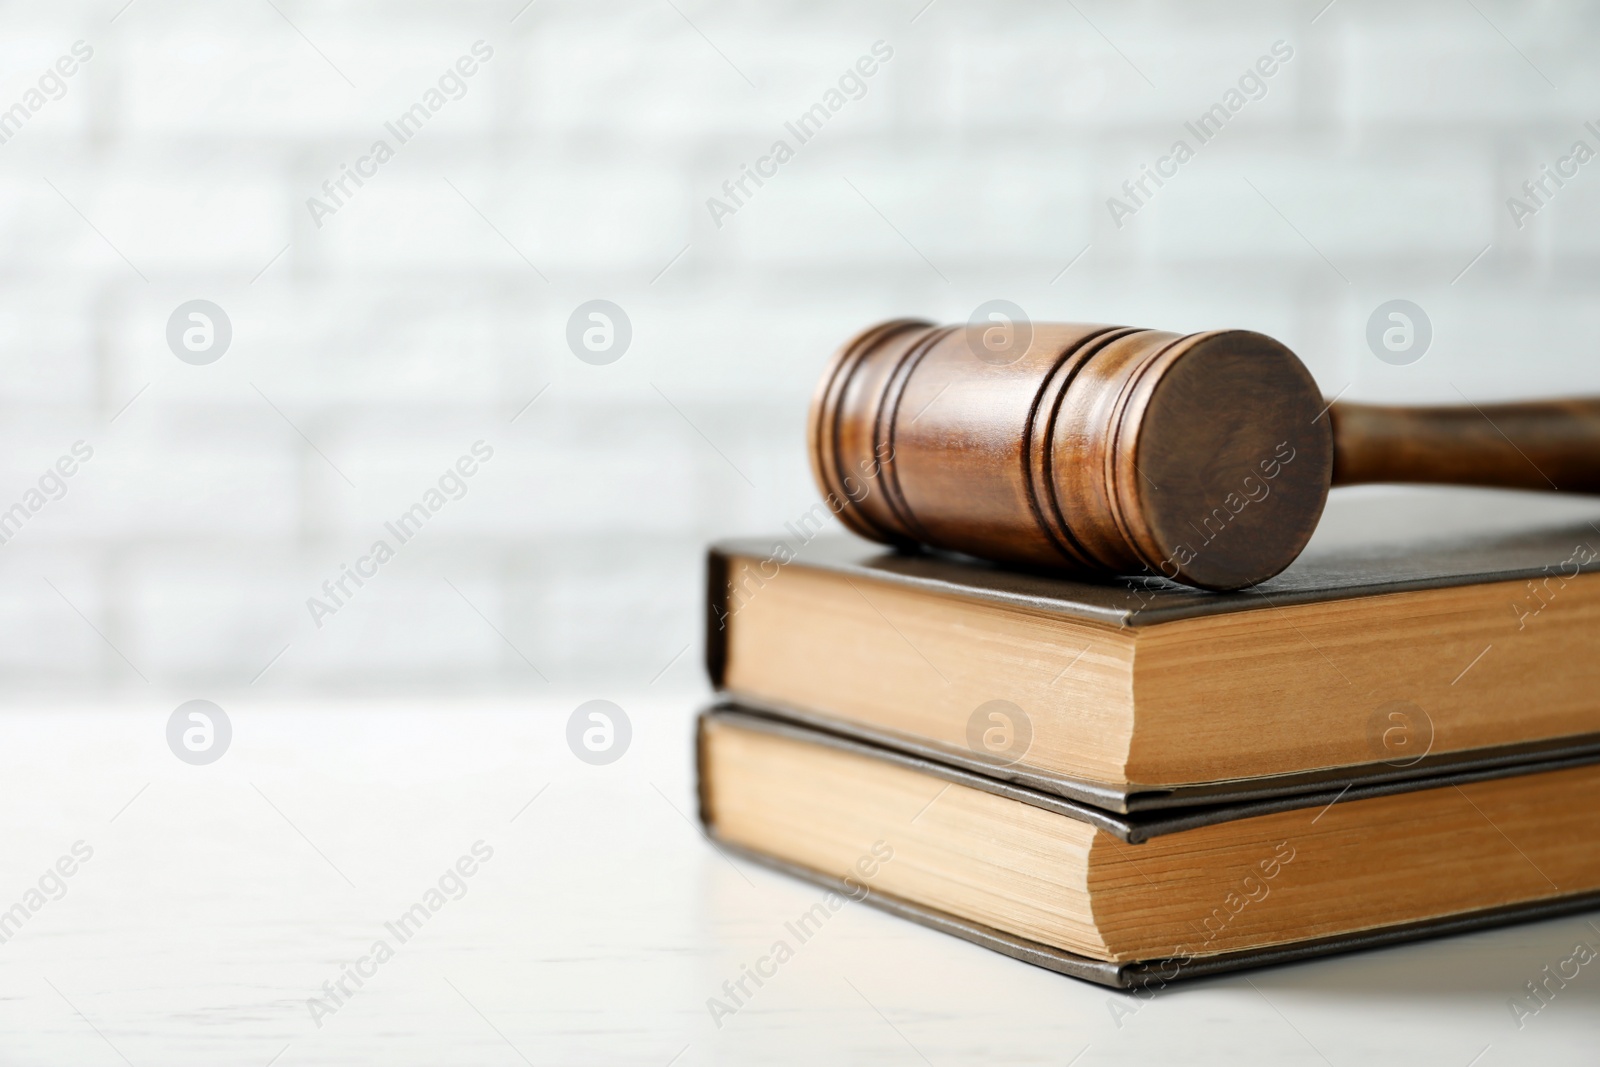 Photo of Wooden gavel and books on table against brick wall. Law concept